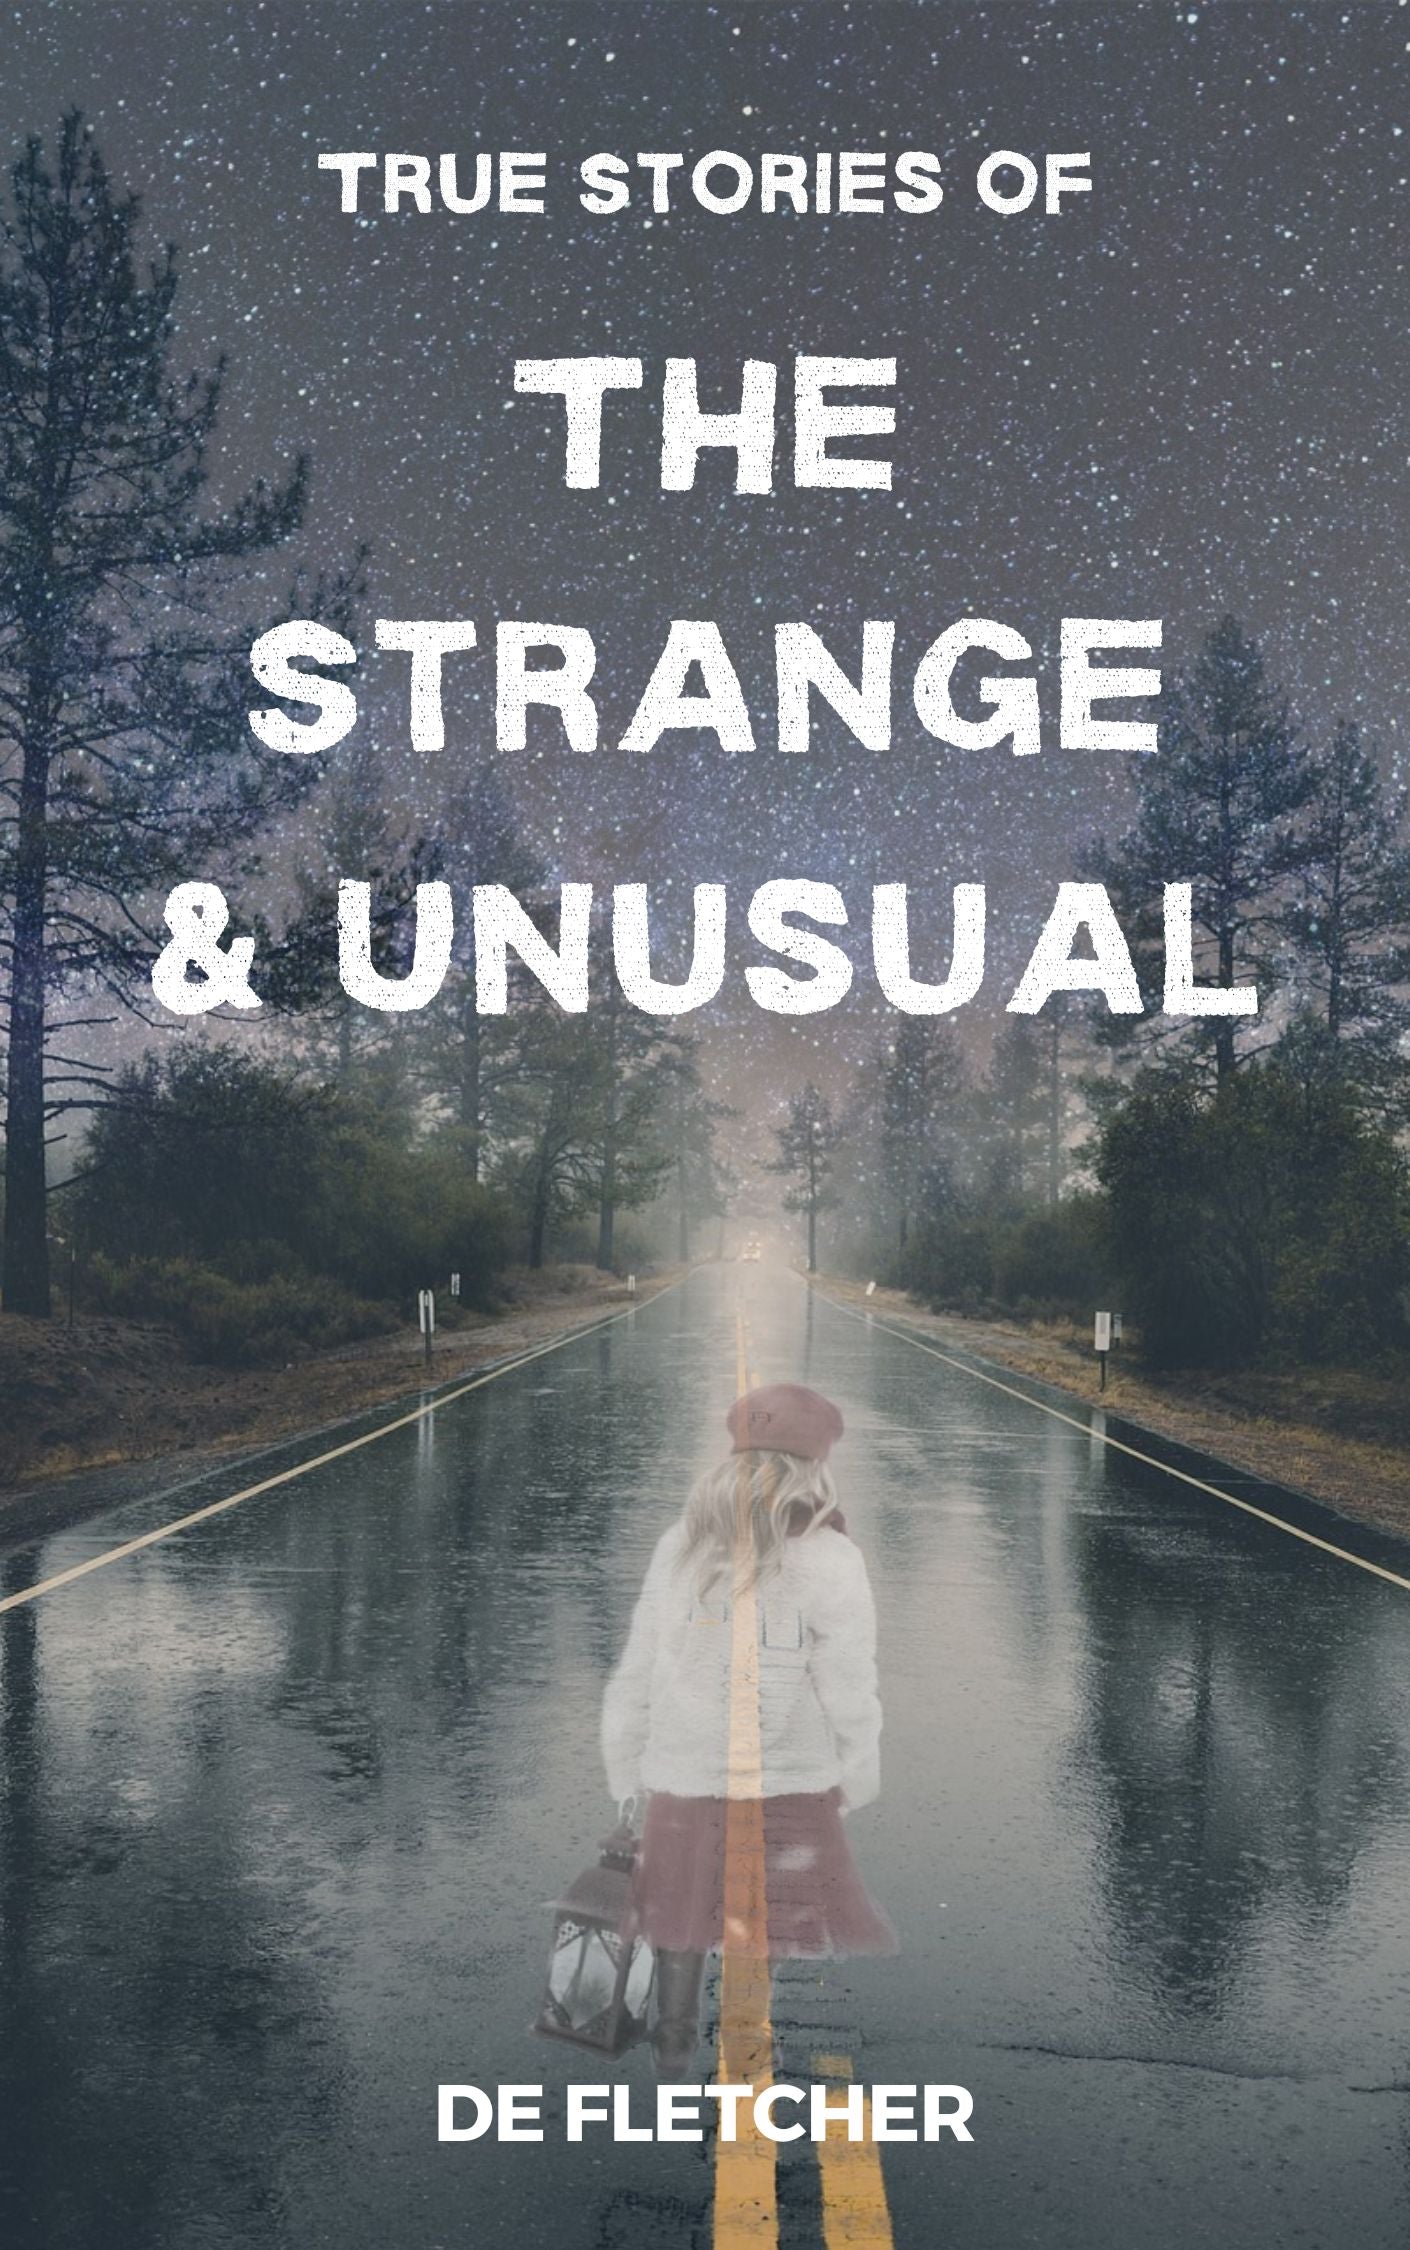 Book cover image of the spirit of a young girl in the middle of a road in fog